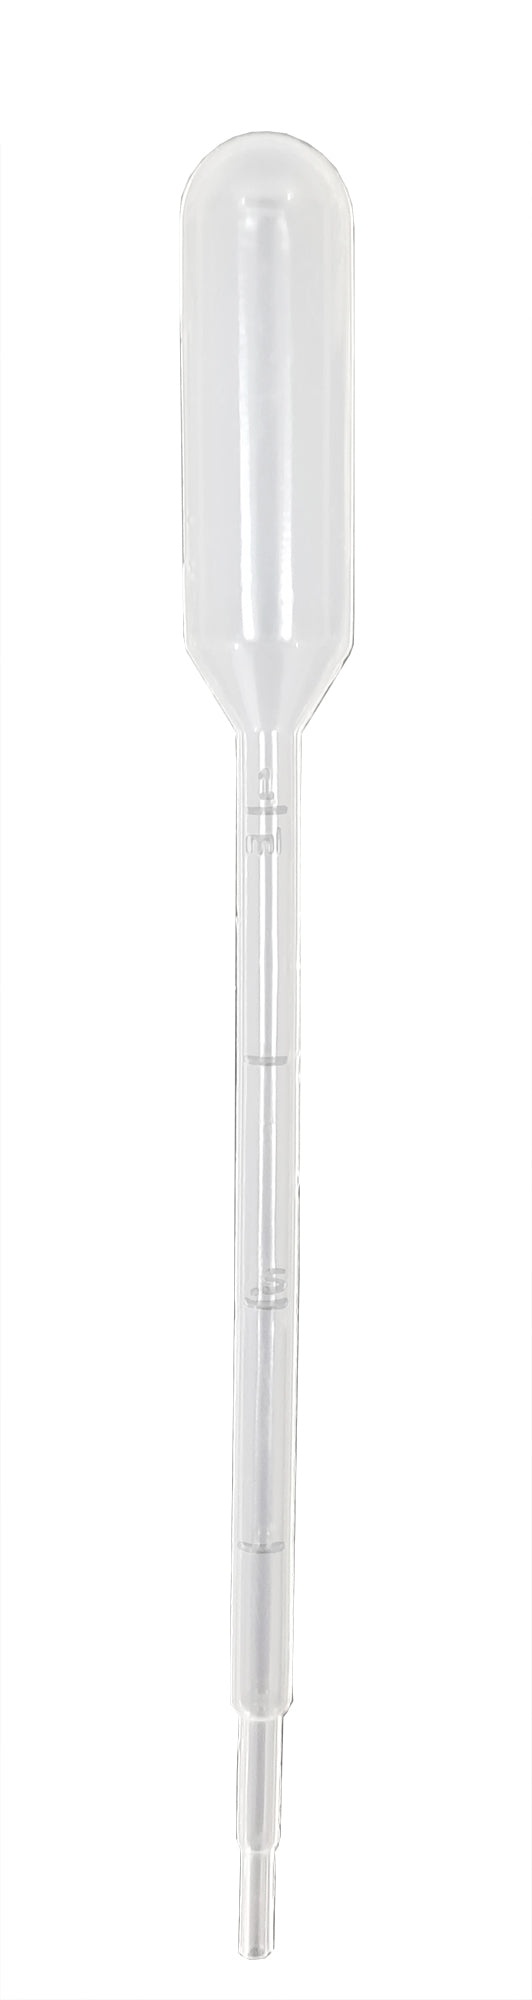 Gsc International Disposable Transfer Pipettes, 5Ml Capacity, Graduated 1Ml By 1/4Ml, Pack Of 100